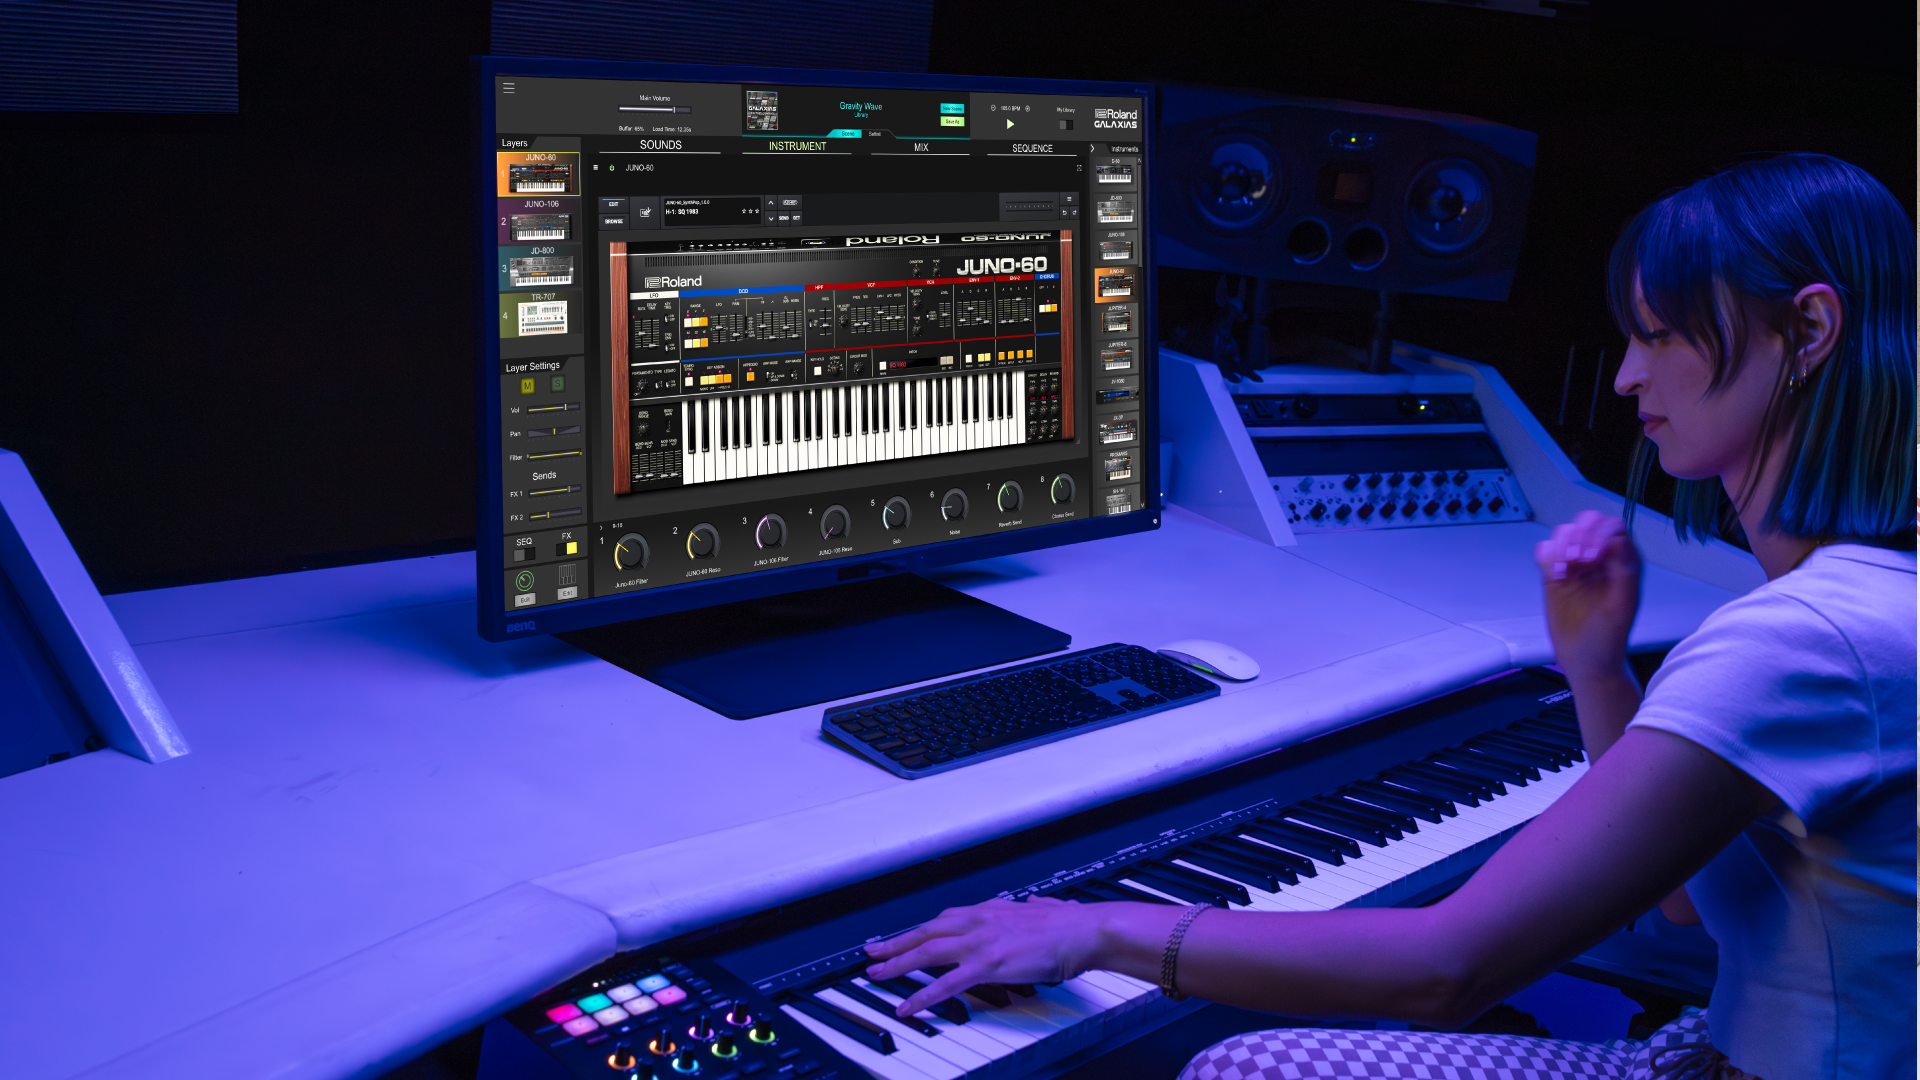 Roland's new software instrument Galaxias offers access to 20,000 sounds